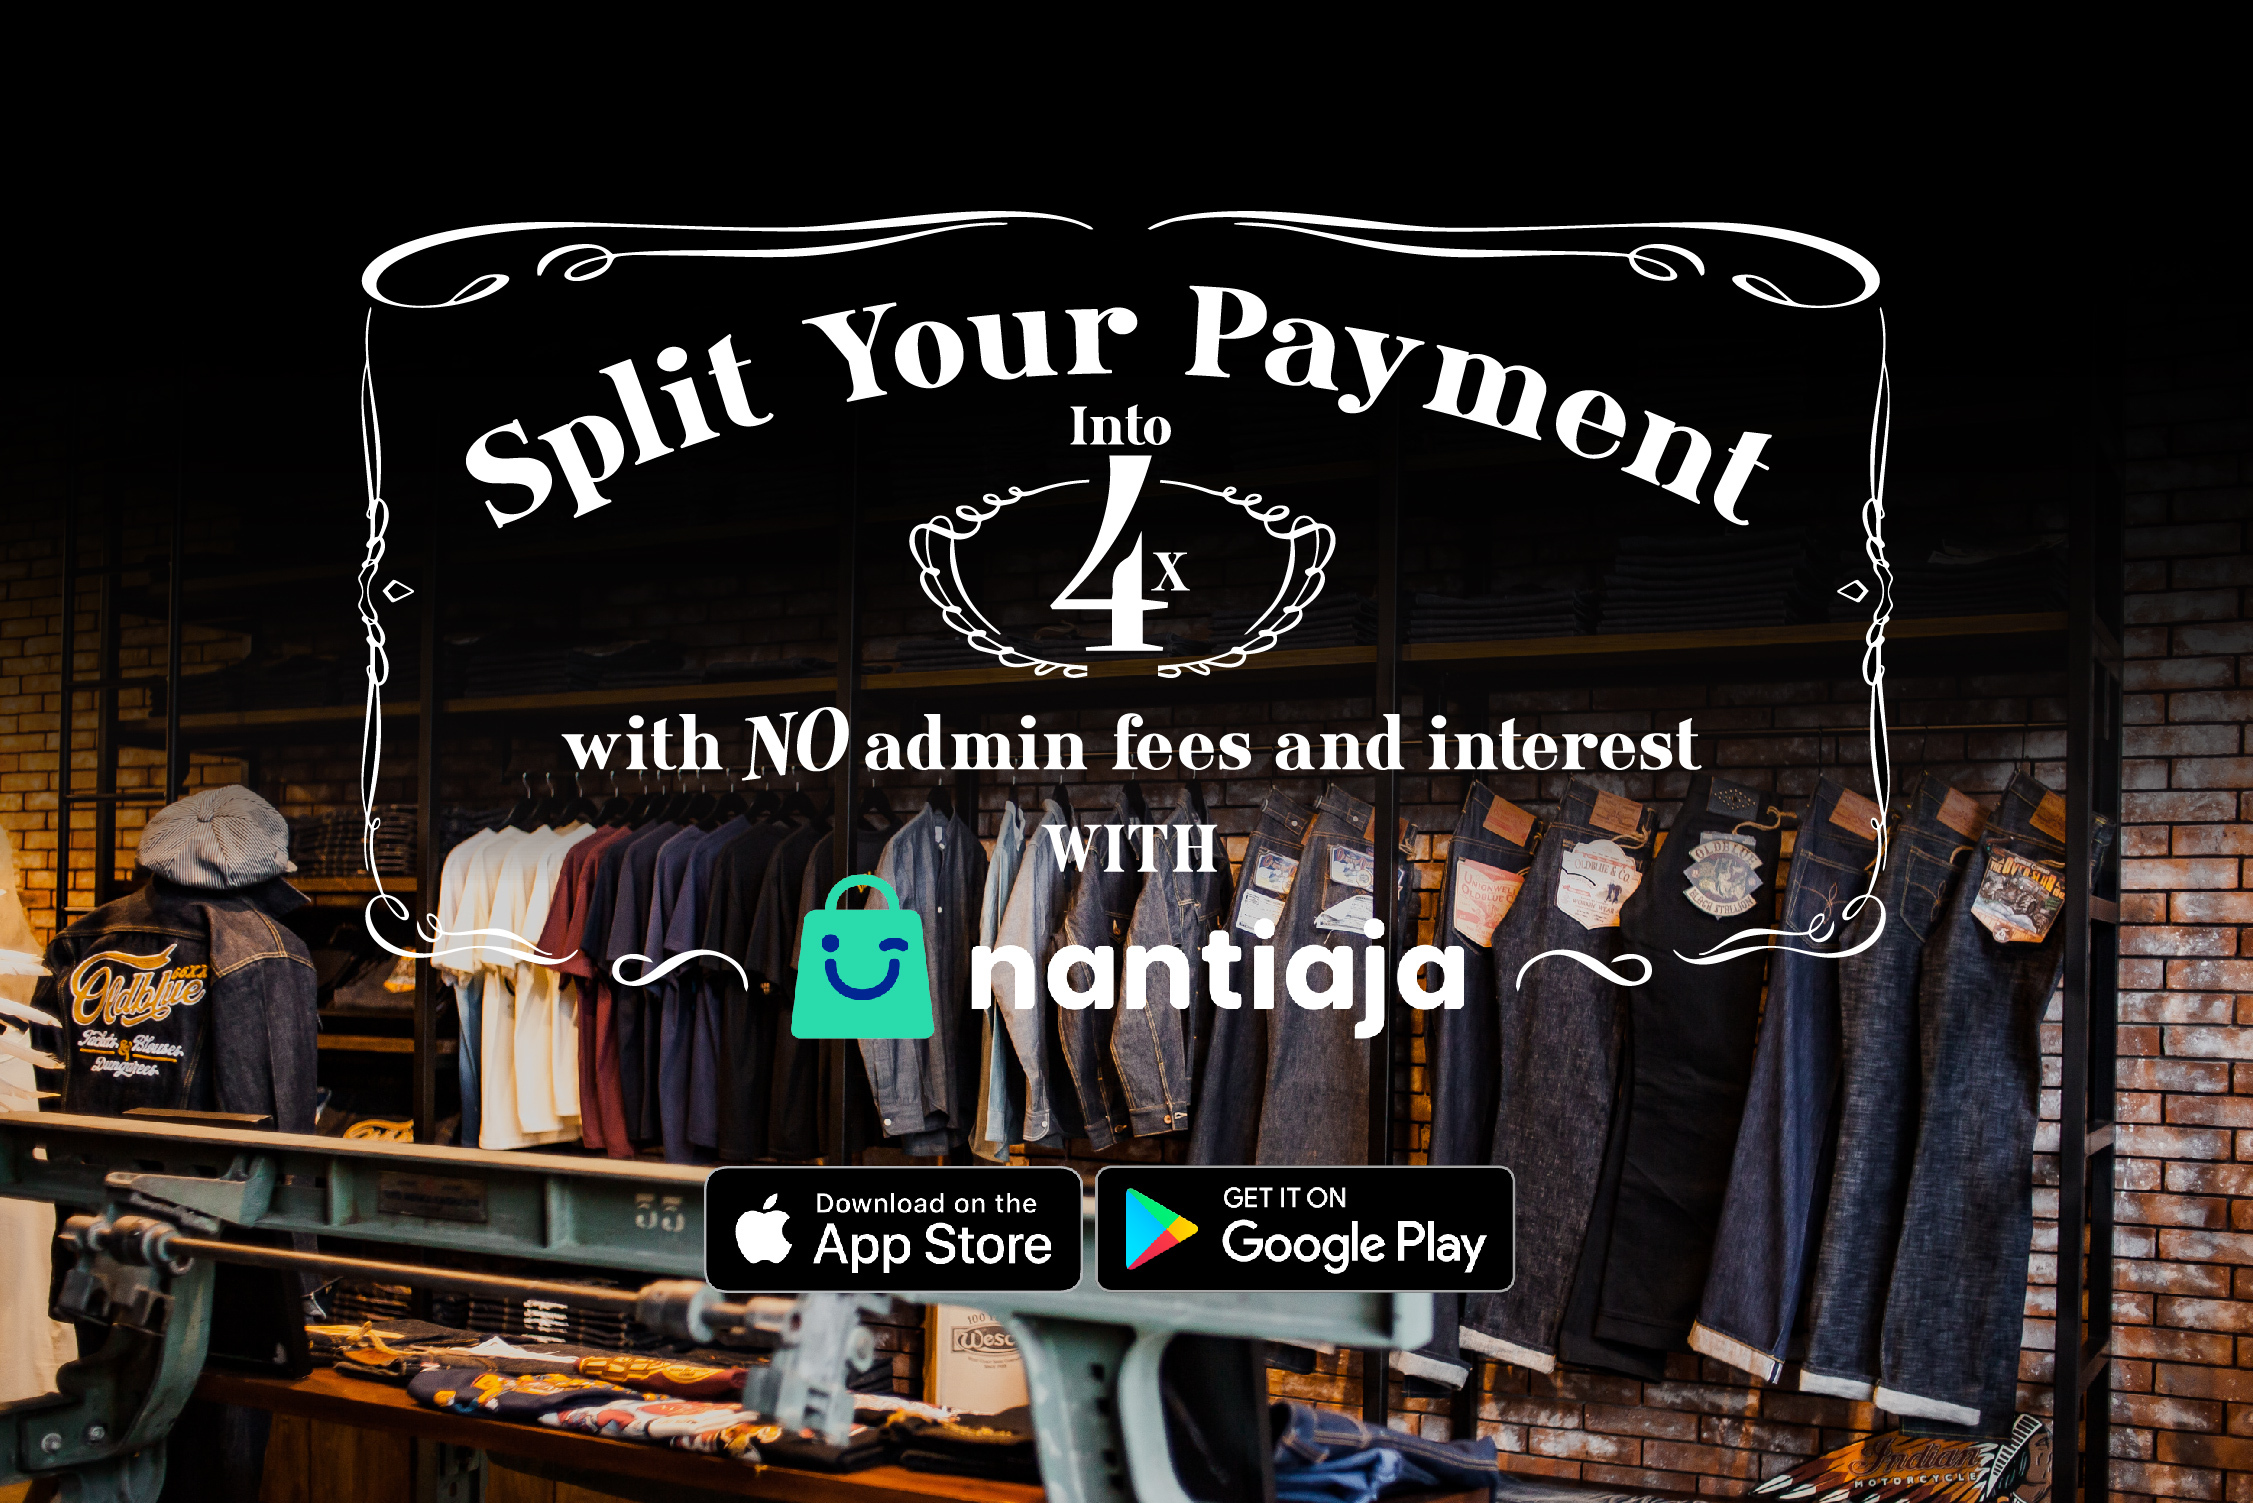 Partnering Up With NantiAja, You Can Now Split Your Payment Into 4!